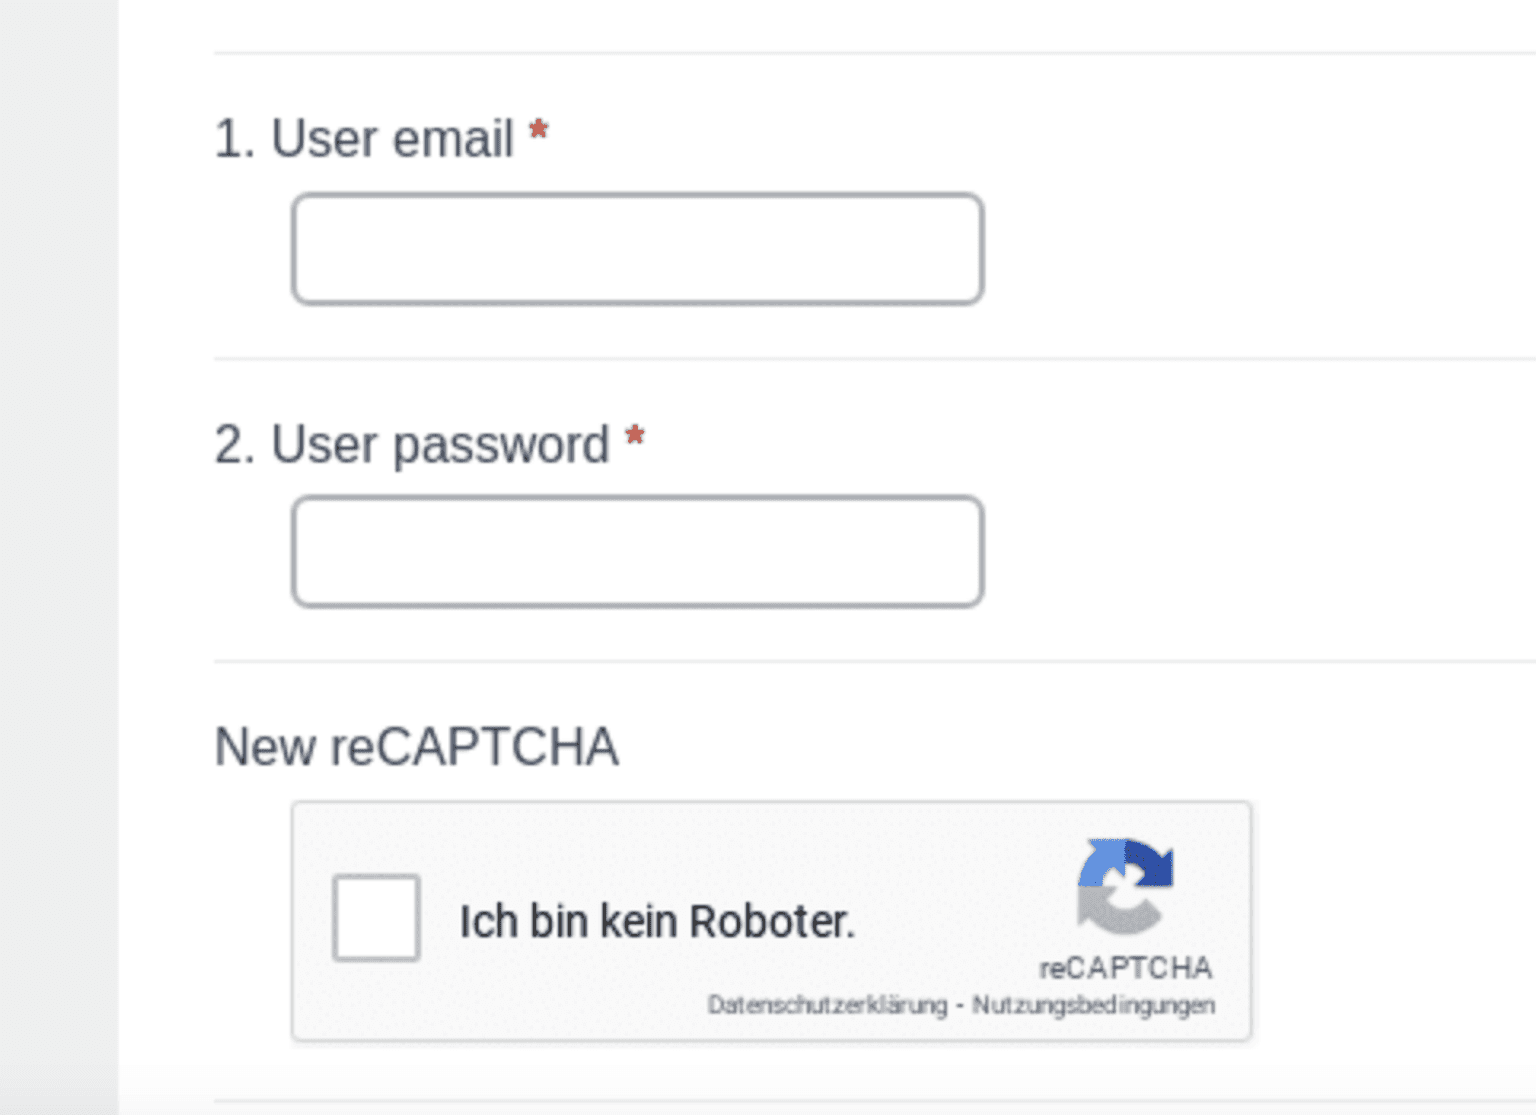 Login page with recaptcha from Quishing attack